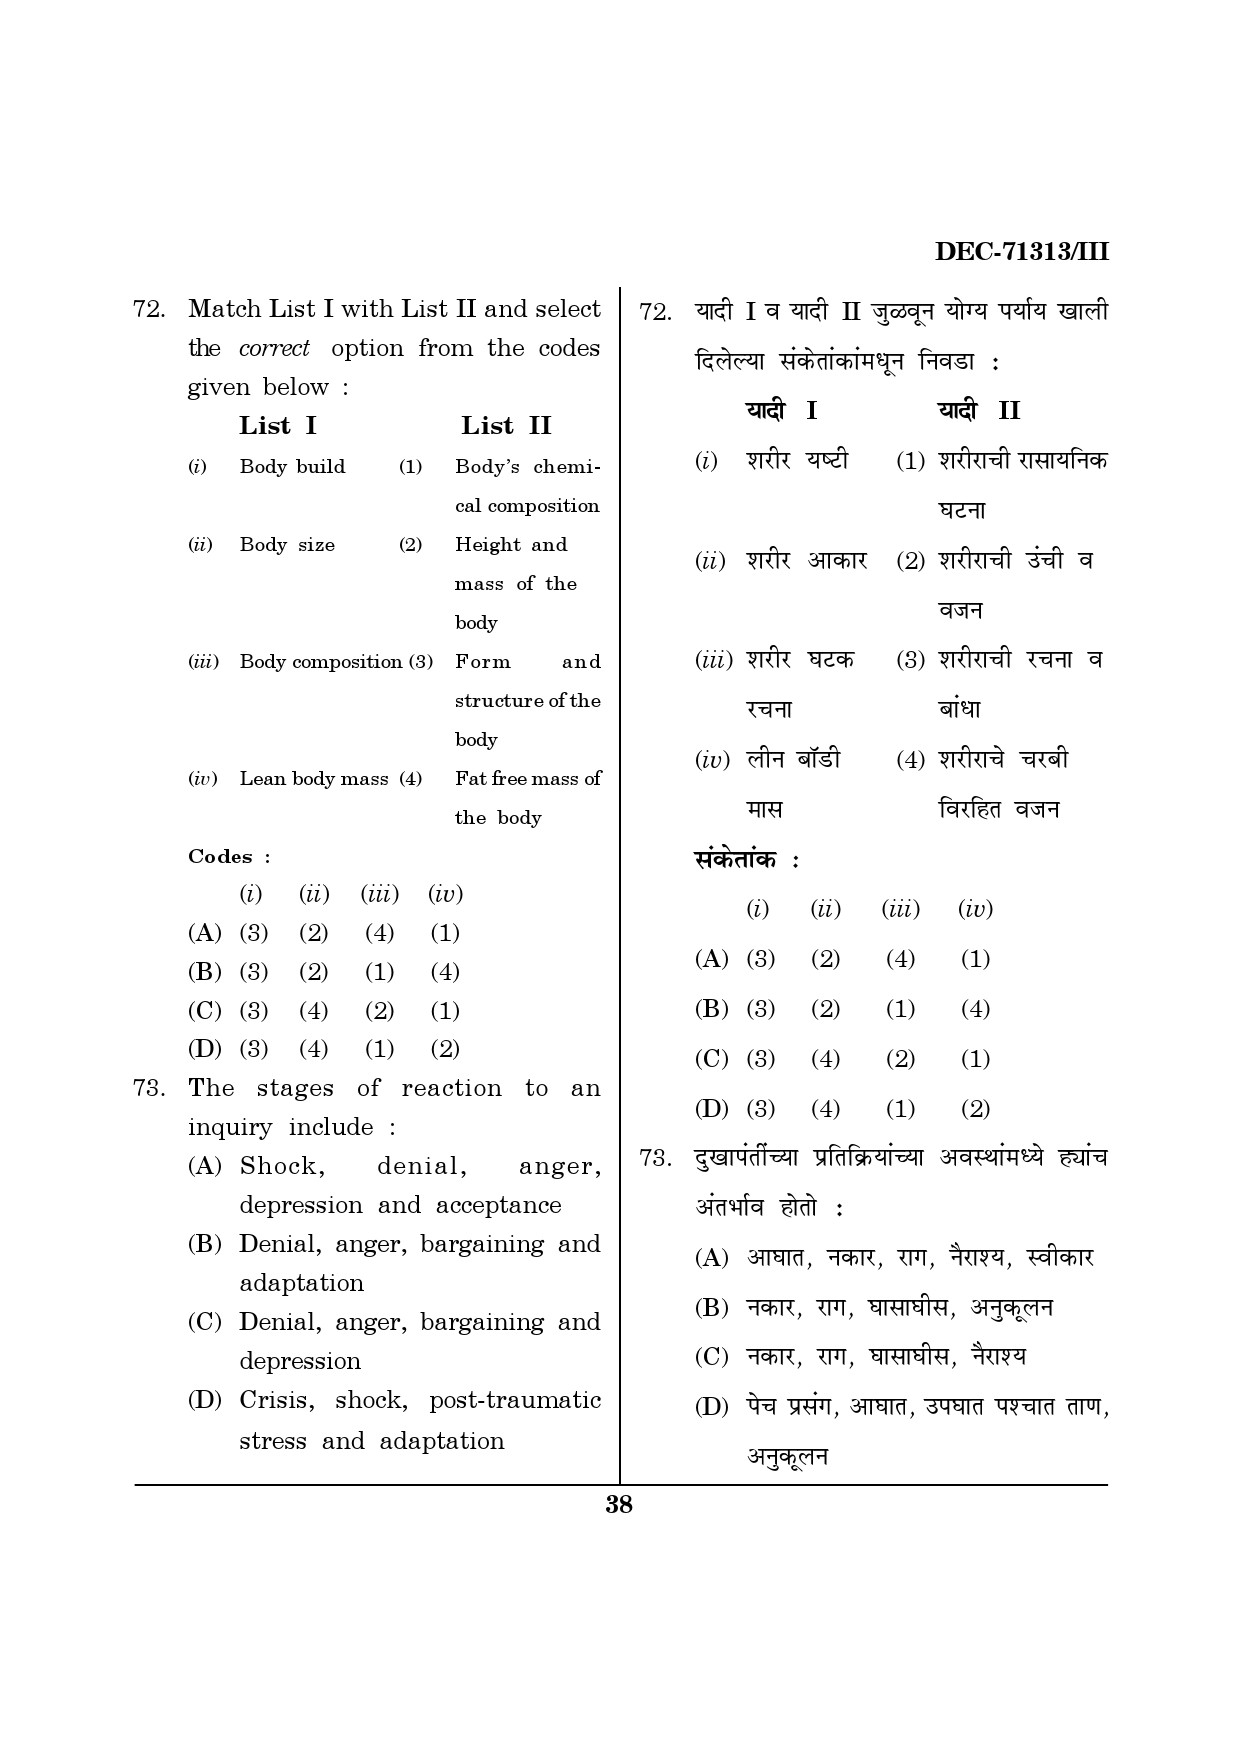 Maharashtra SET Physical Education Question Paper III December 2013 37